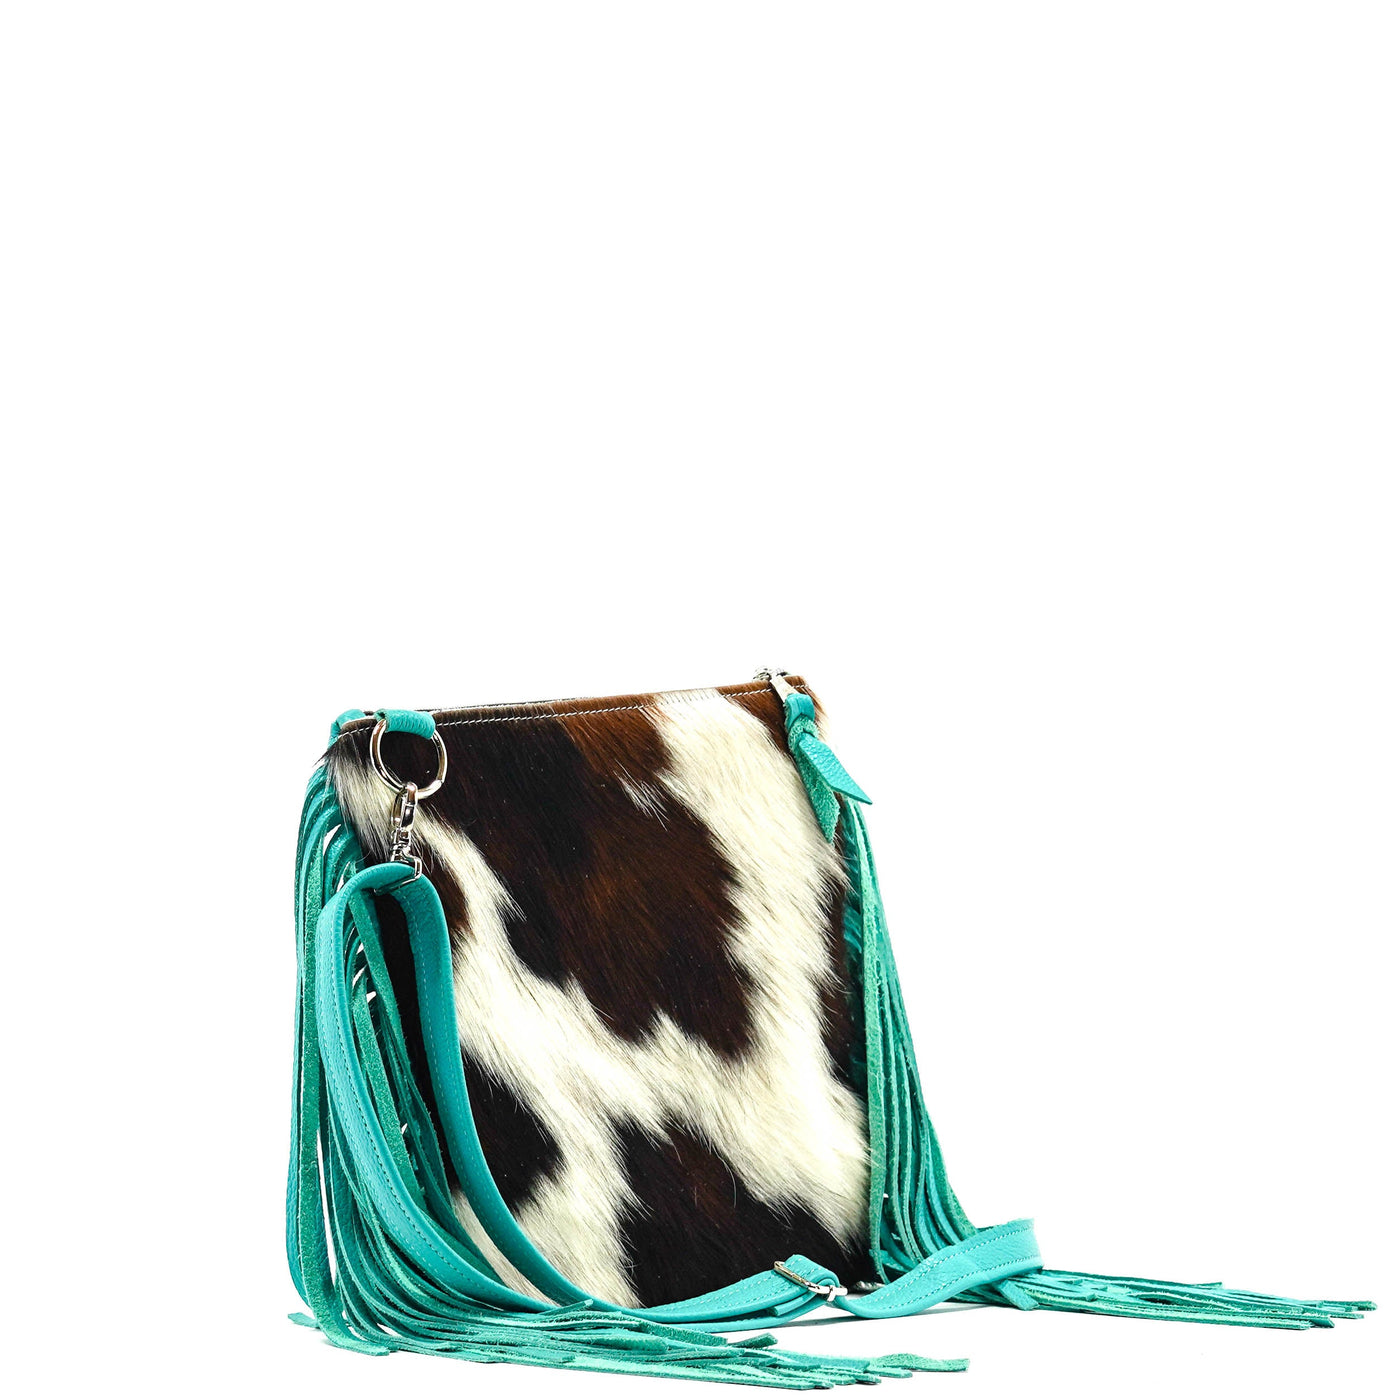 Shania - Tricolor w/ No Embossed-Shania-Western-Cowhide-Bags-Handmade-Products-Gifts-Dancing Cactus Designs